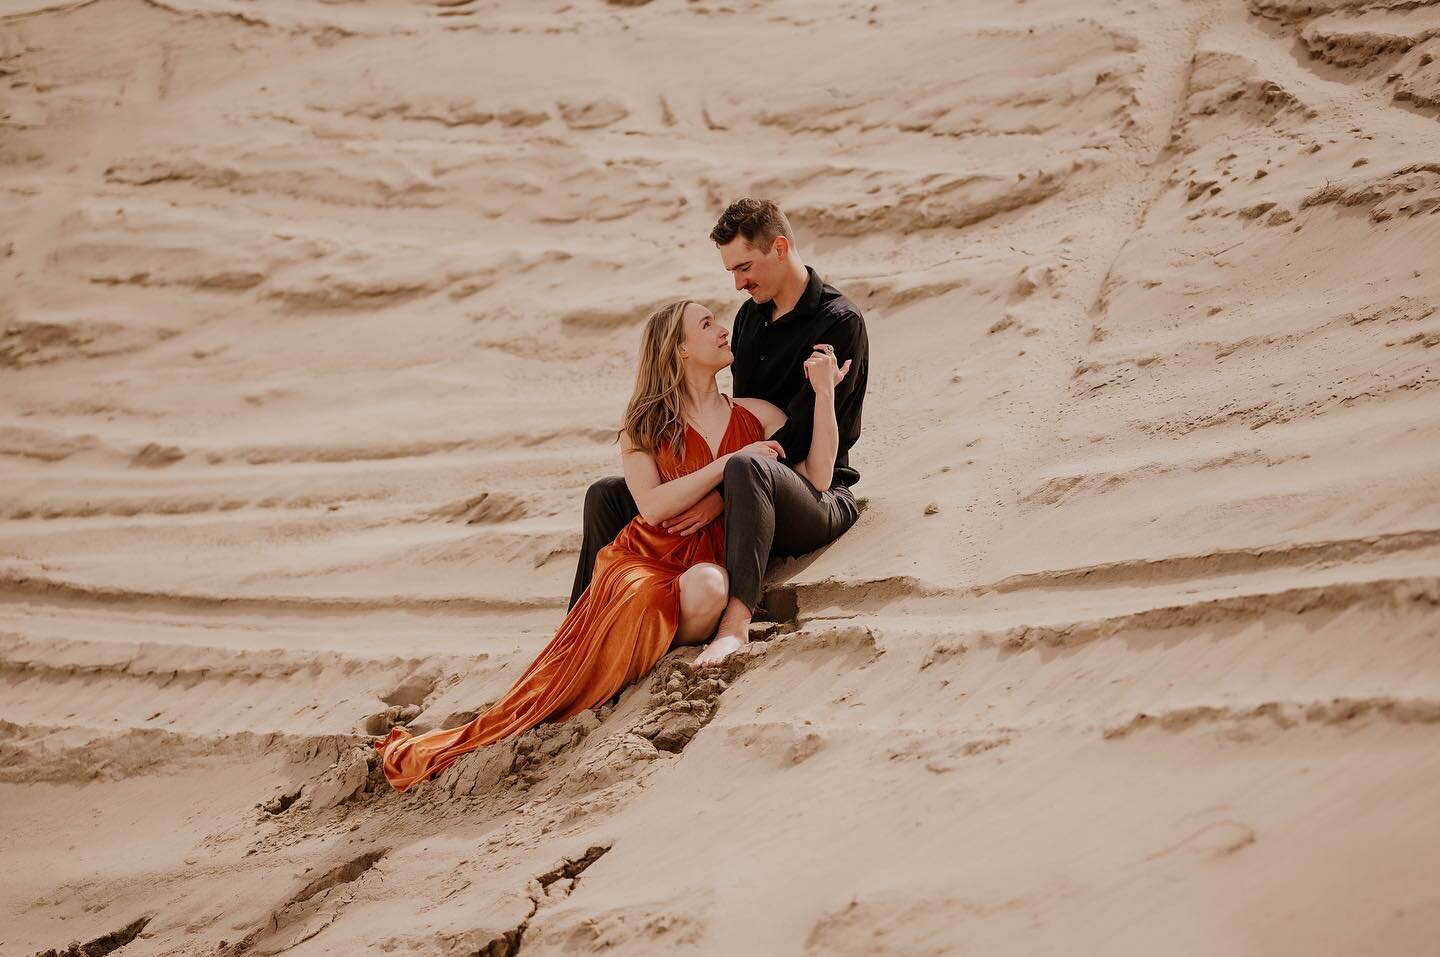 Emma &amp; Nick got engaged recently and ever since I&rsquo;ve been reminiscing their sand dune shoot back in April. 

I met them on my western USA road trip and was lucky enough to have them in front of my camera. 

These two are so wonderful and I 